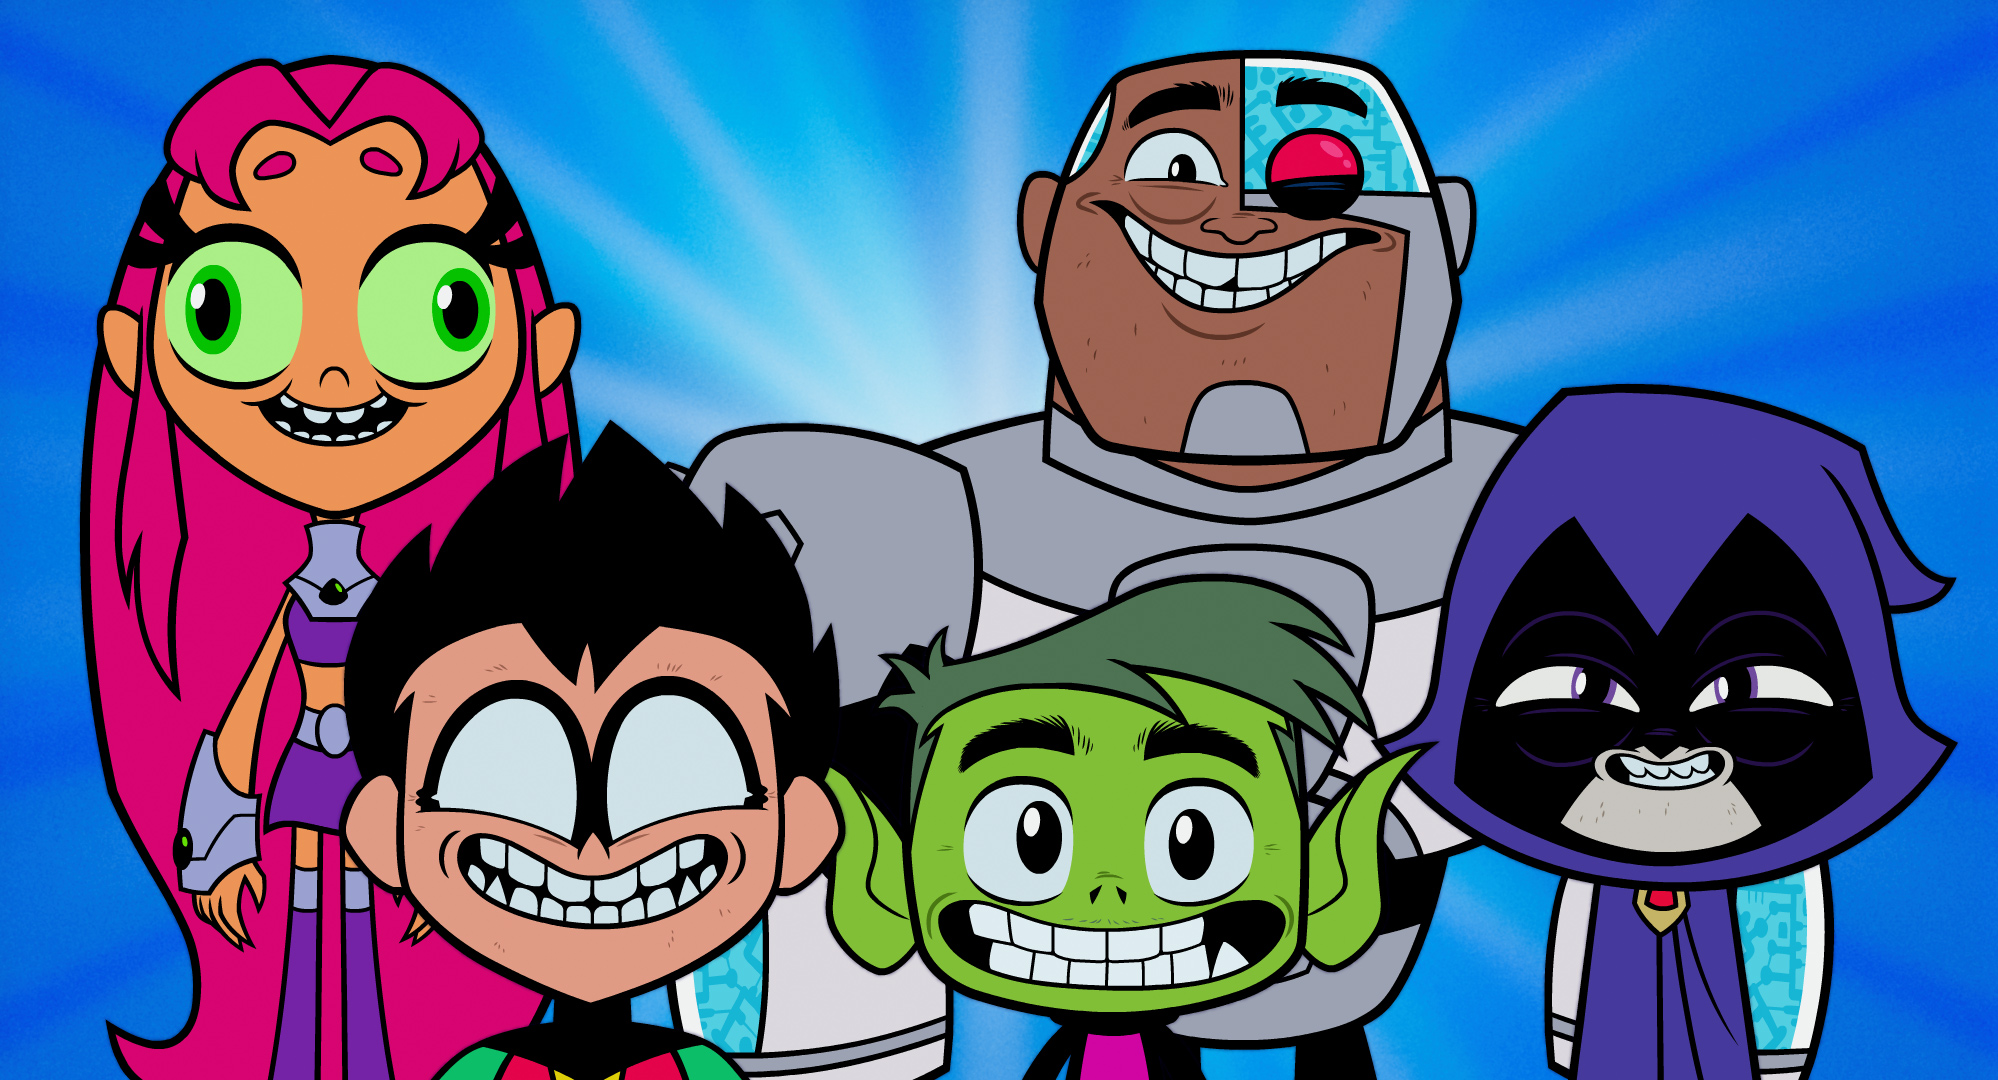 Teen Titans Go! debuted on Cartoon Network in April 2013